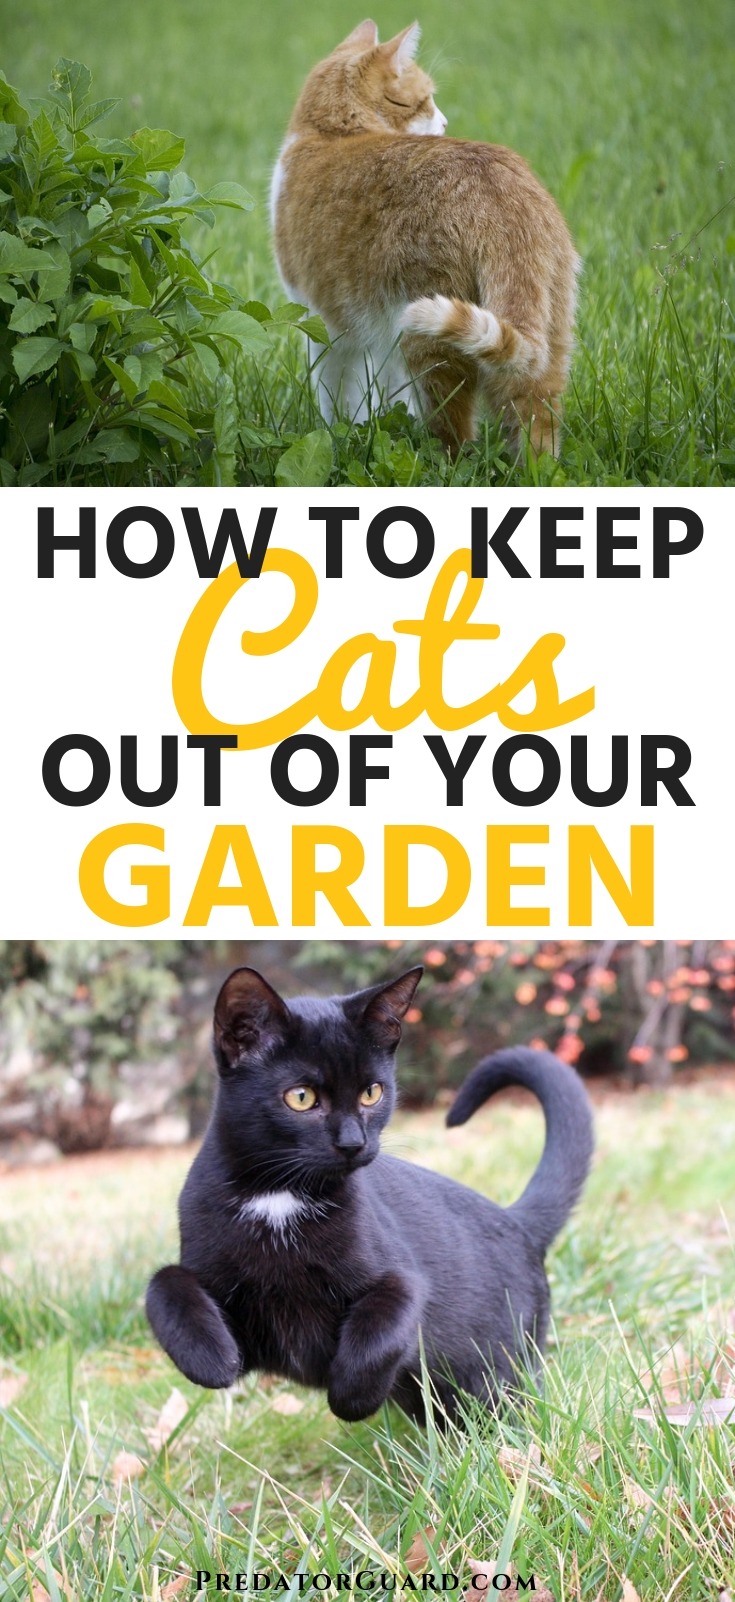 How To Keep Cats Out Of Your Garden Predator Guard Predator Deterrents And Repellents,Bamboo Floors With Grey Walls